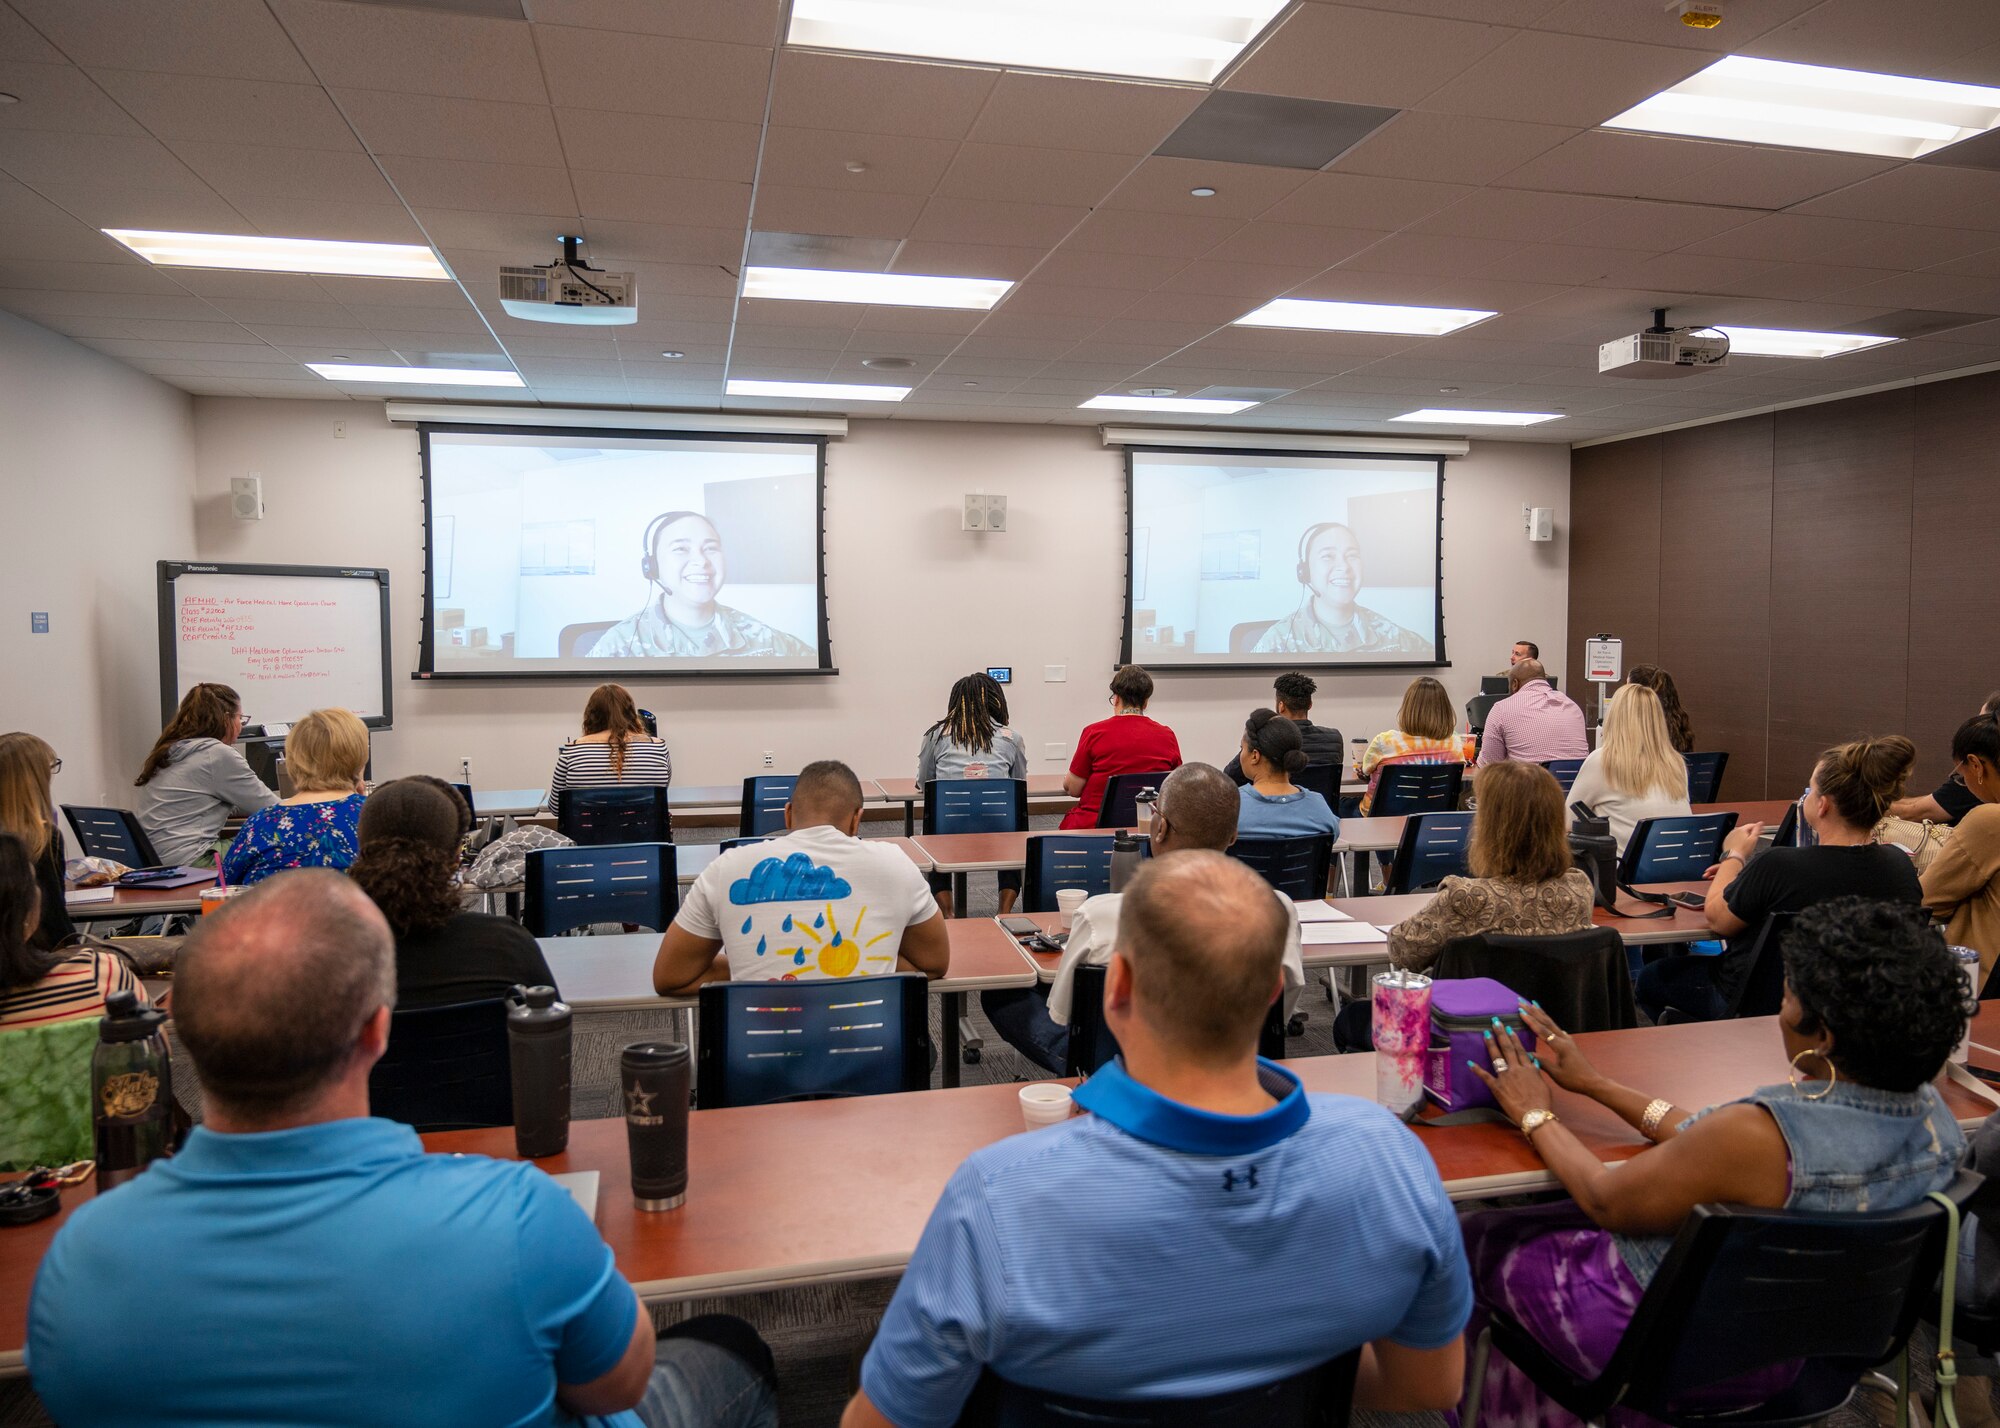 U.S. Air Force Master Sgt. Vanessa Flores, Air Force Personnel Center Headquarters medical retentions standards superintendent, instructs Air Force Medical Home personnel through Zoom during an AFMH Operations course, April 28, 2022, at Luke Air Force Base, Arizona.